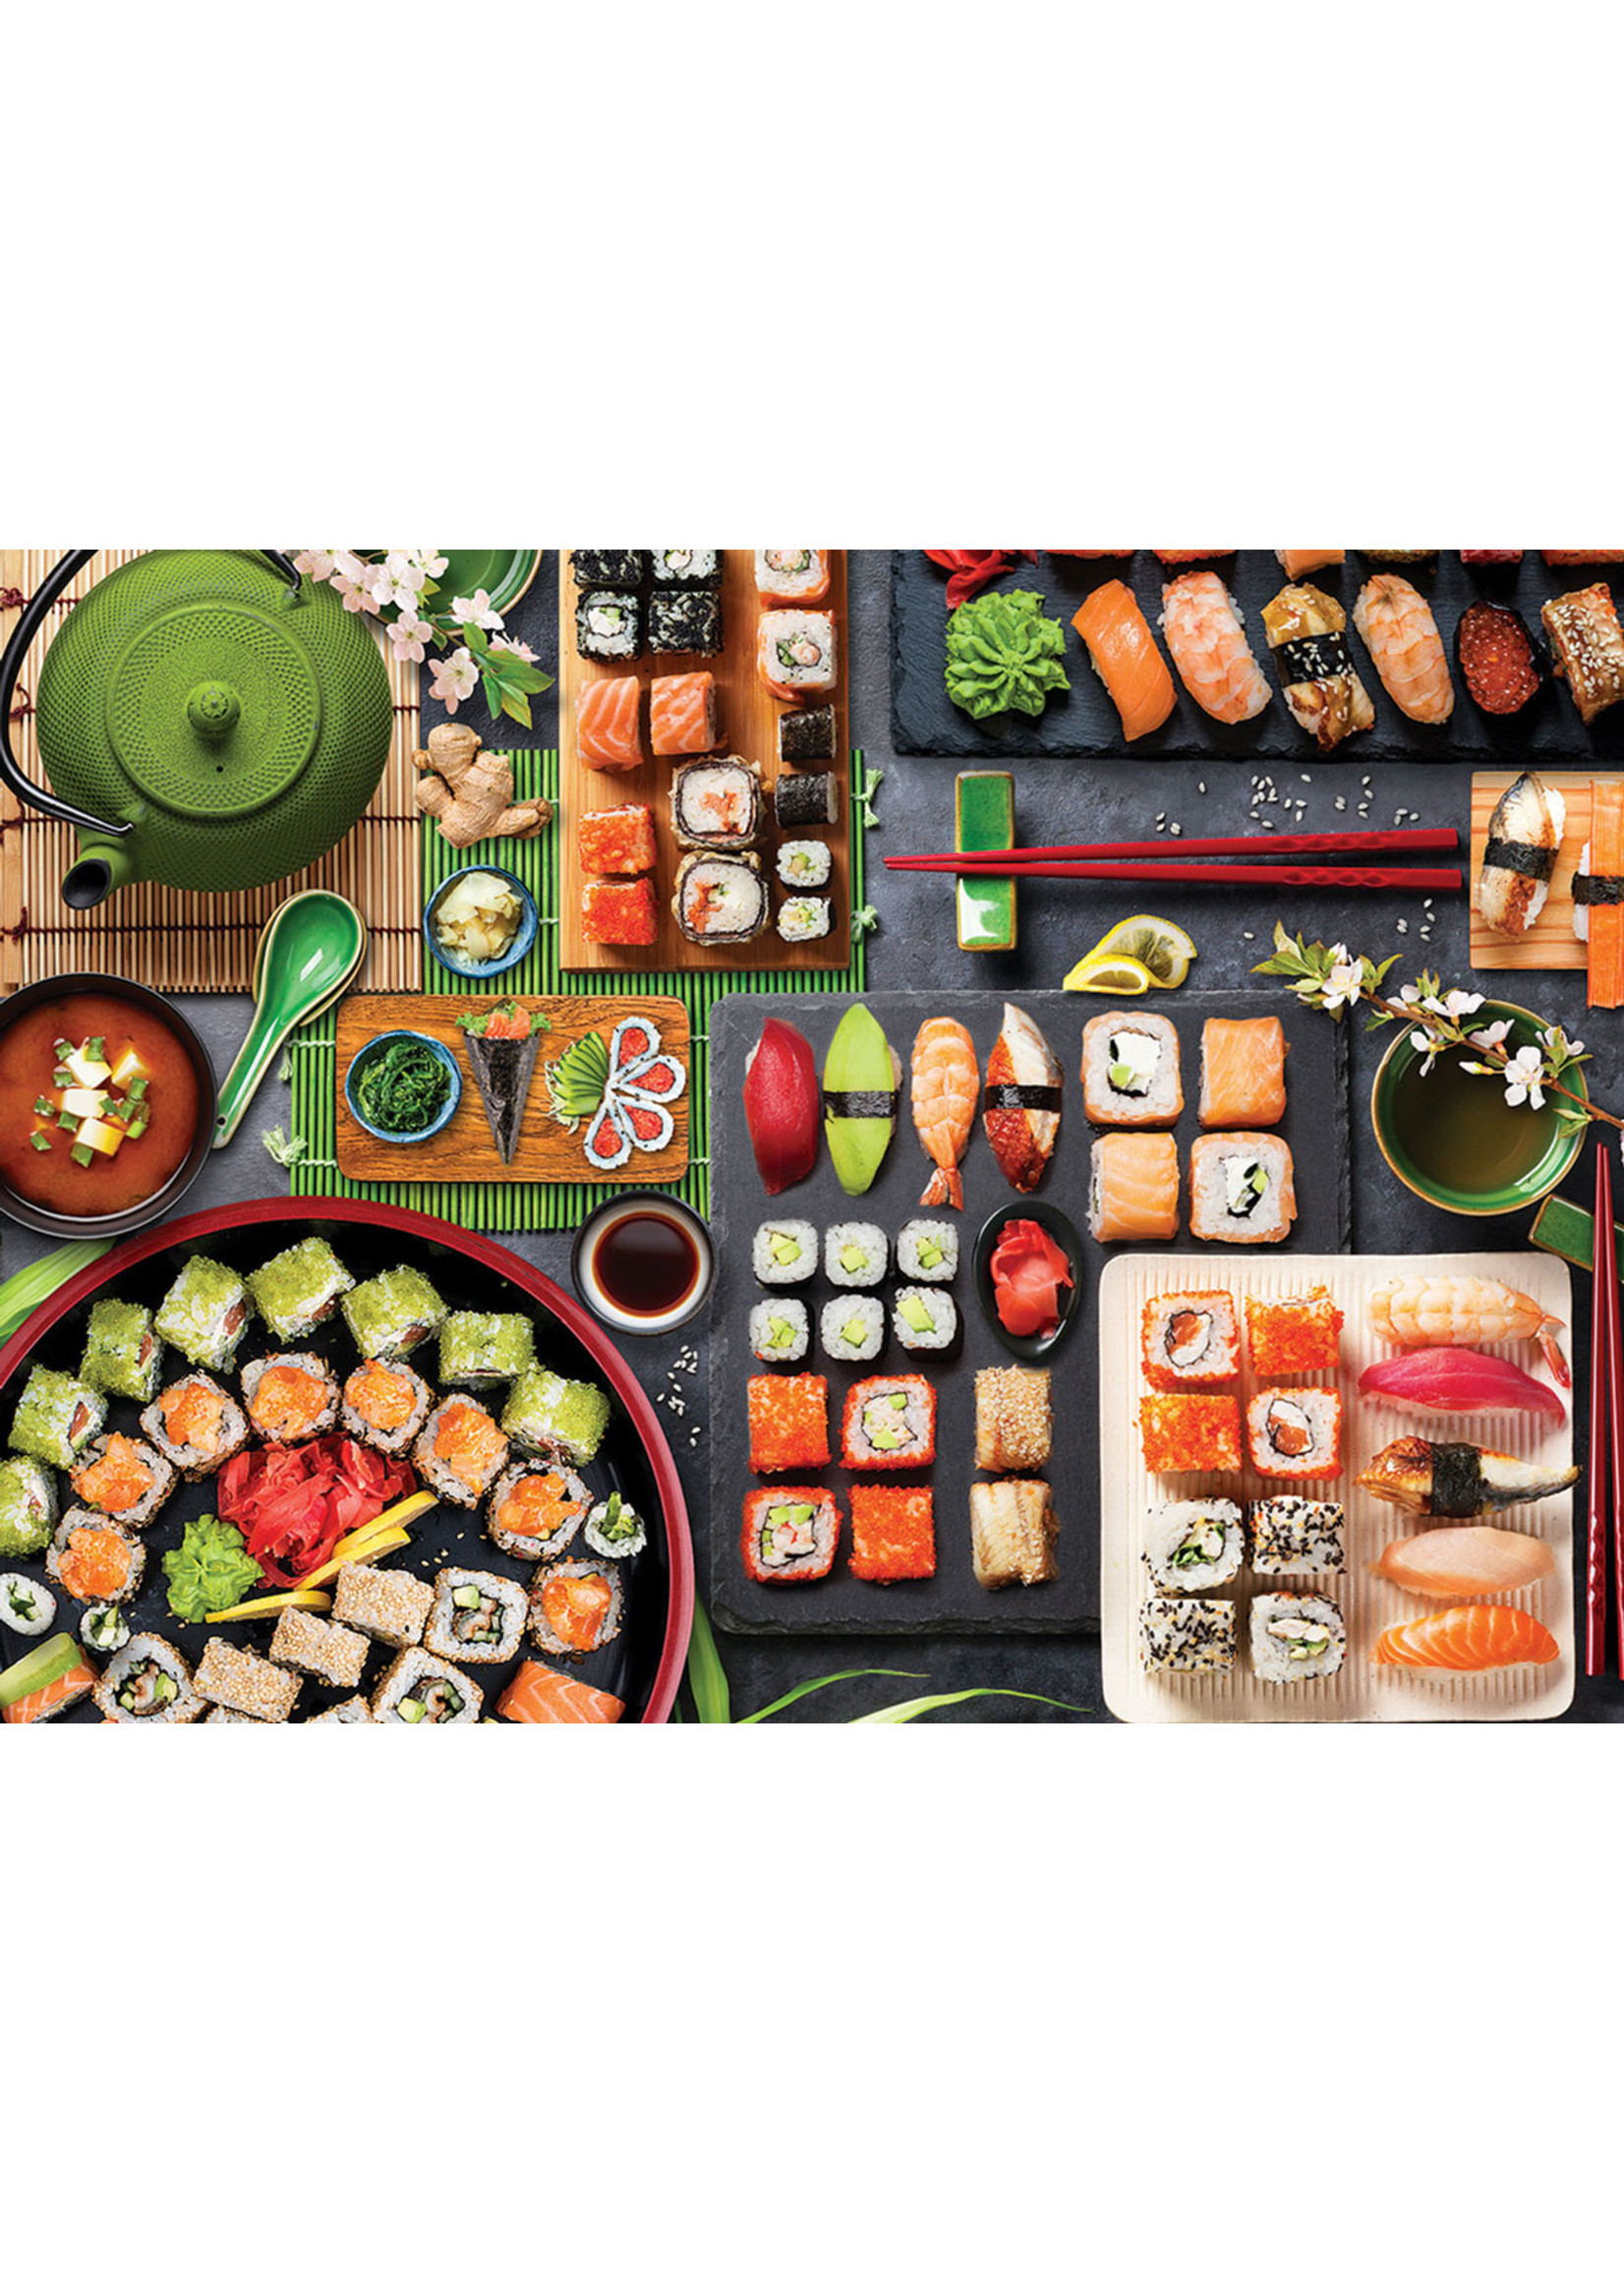 Eurographics "Sushi Table" 1000 Piece Puzzle